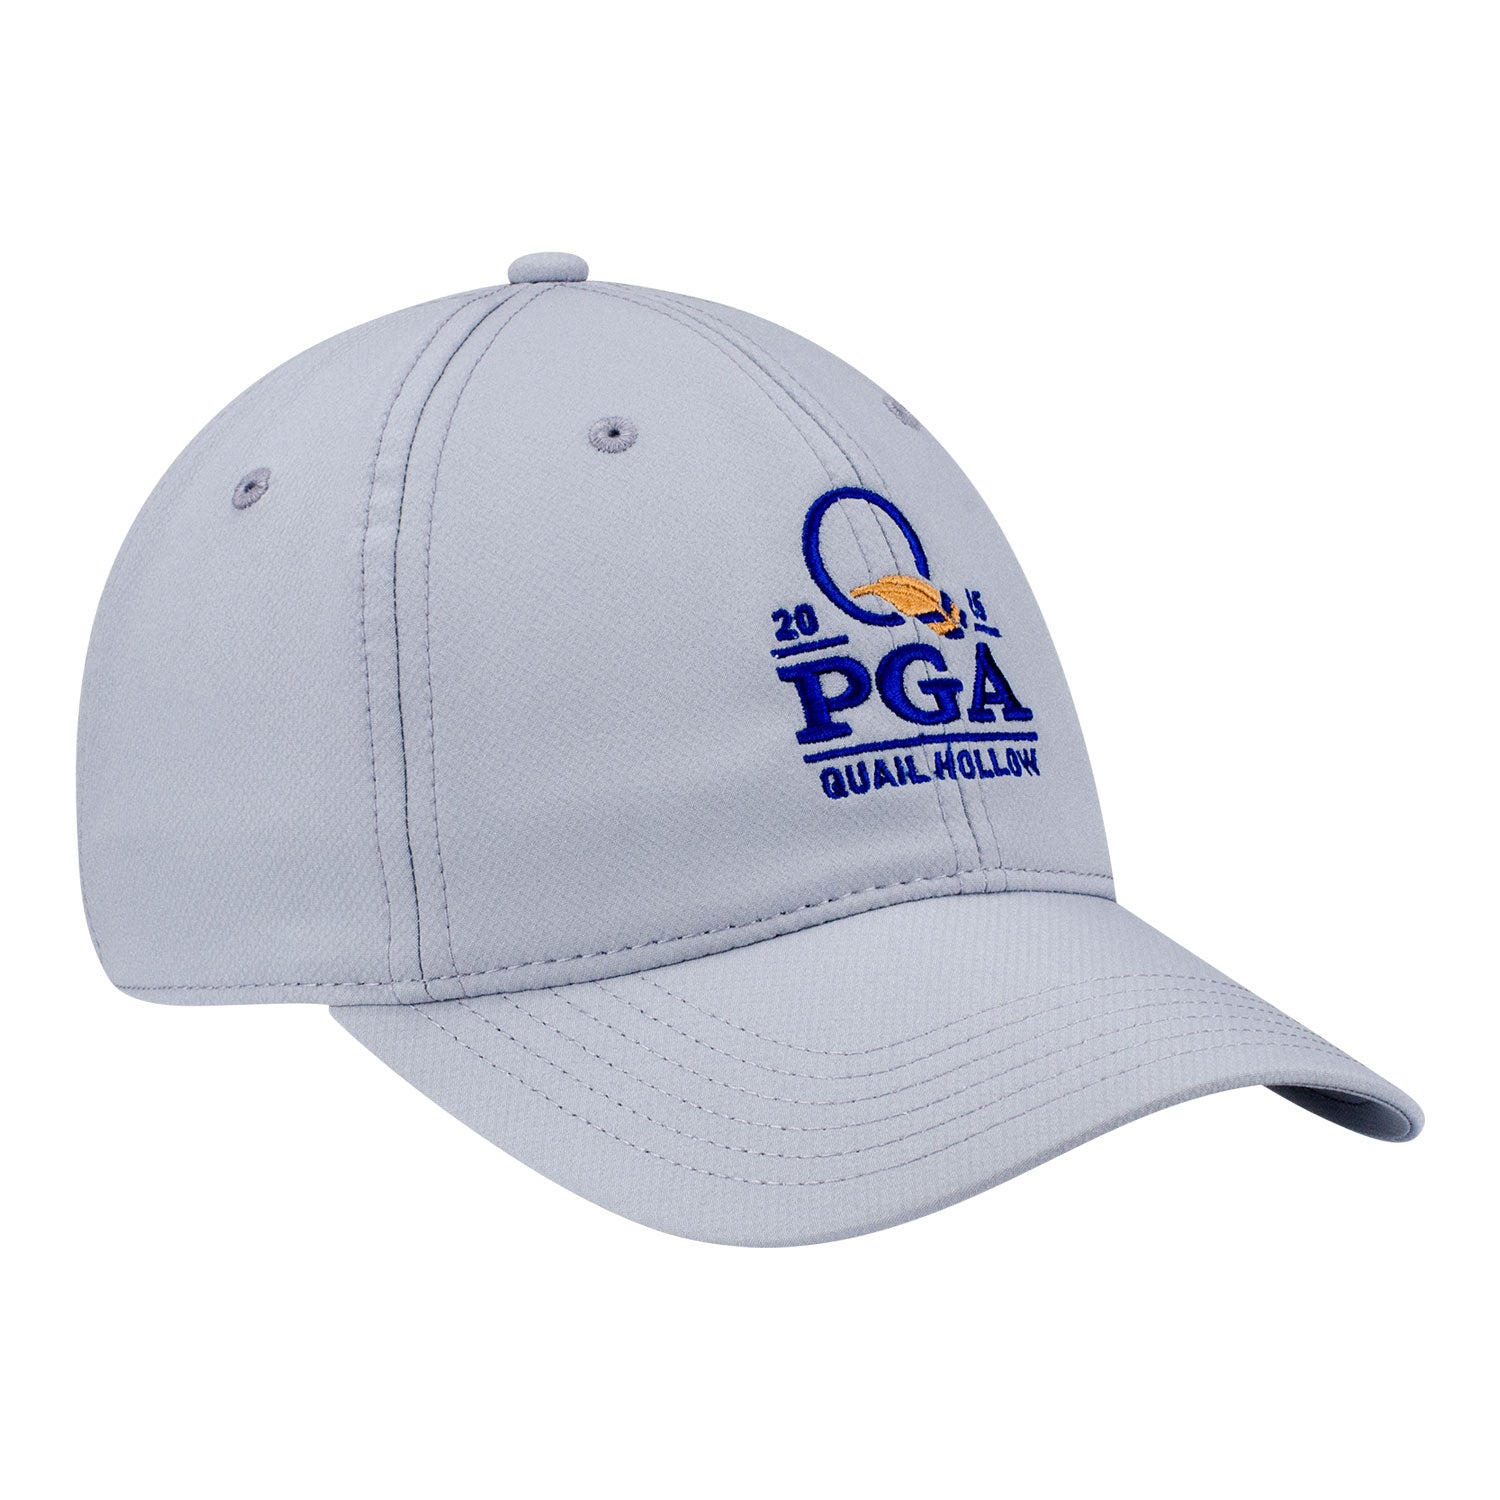 Ahead 2025 PGA Championship Tech Frio Hat in Light Grey - Angled Front Left View